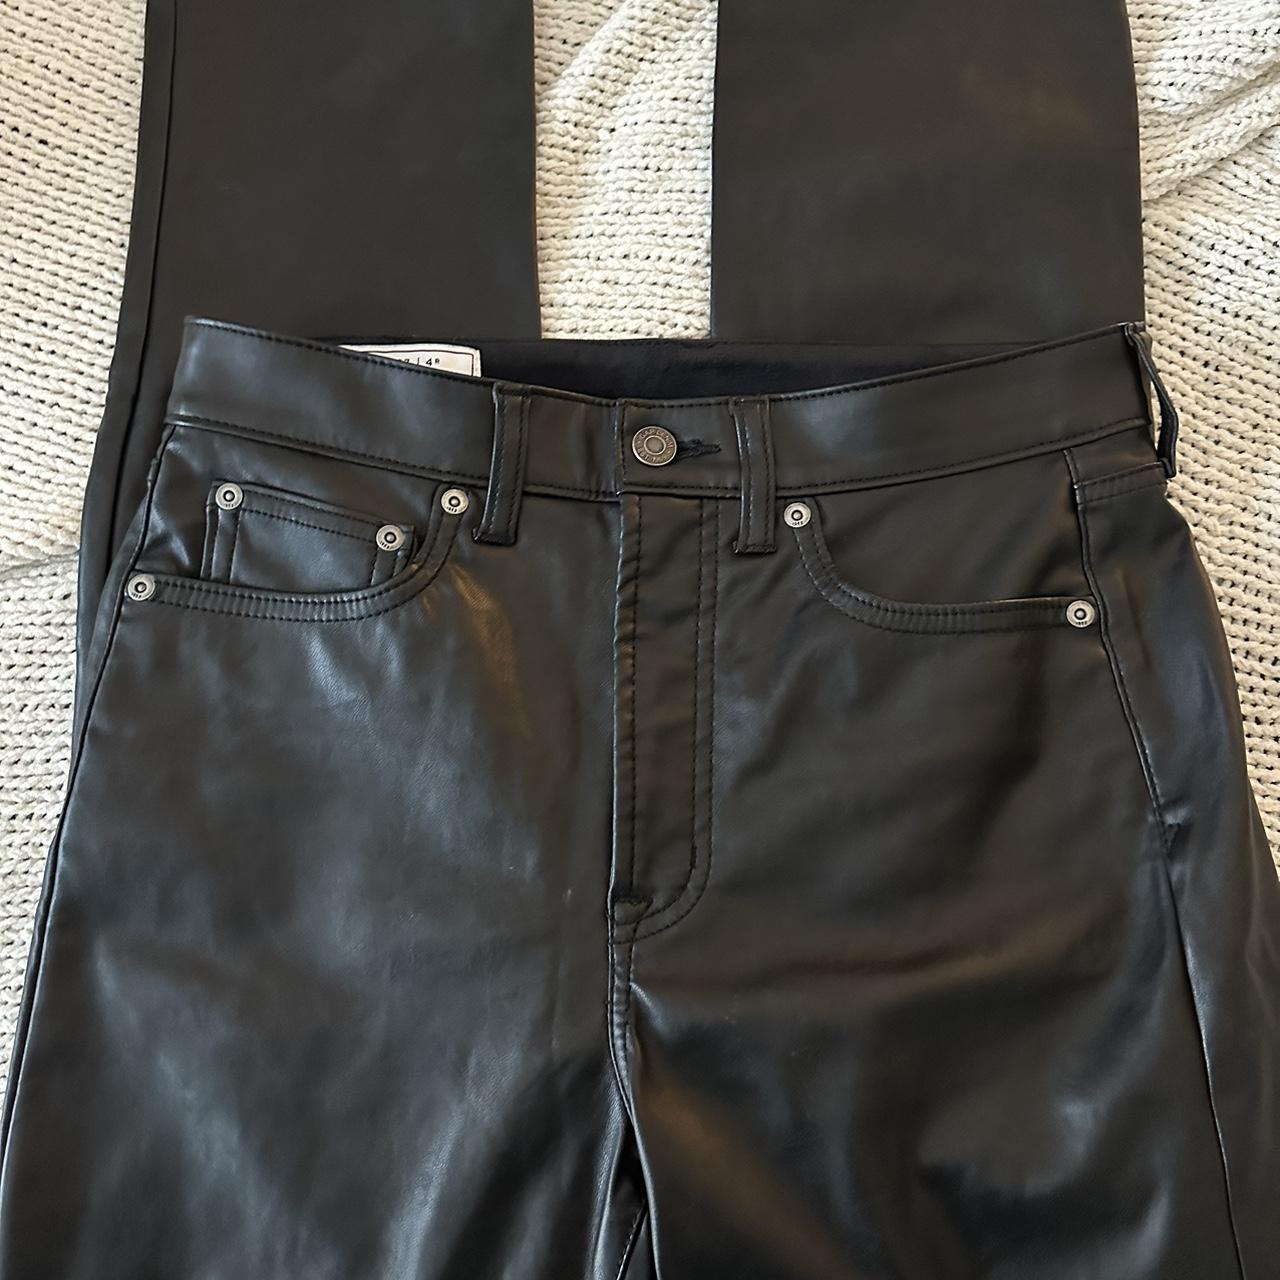 Gap leather trousers Bootcut style I'm nearly 5,7” - Depop